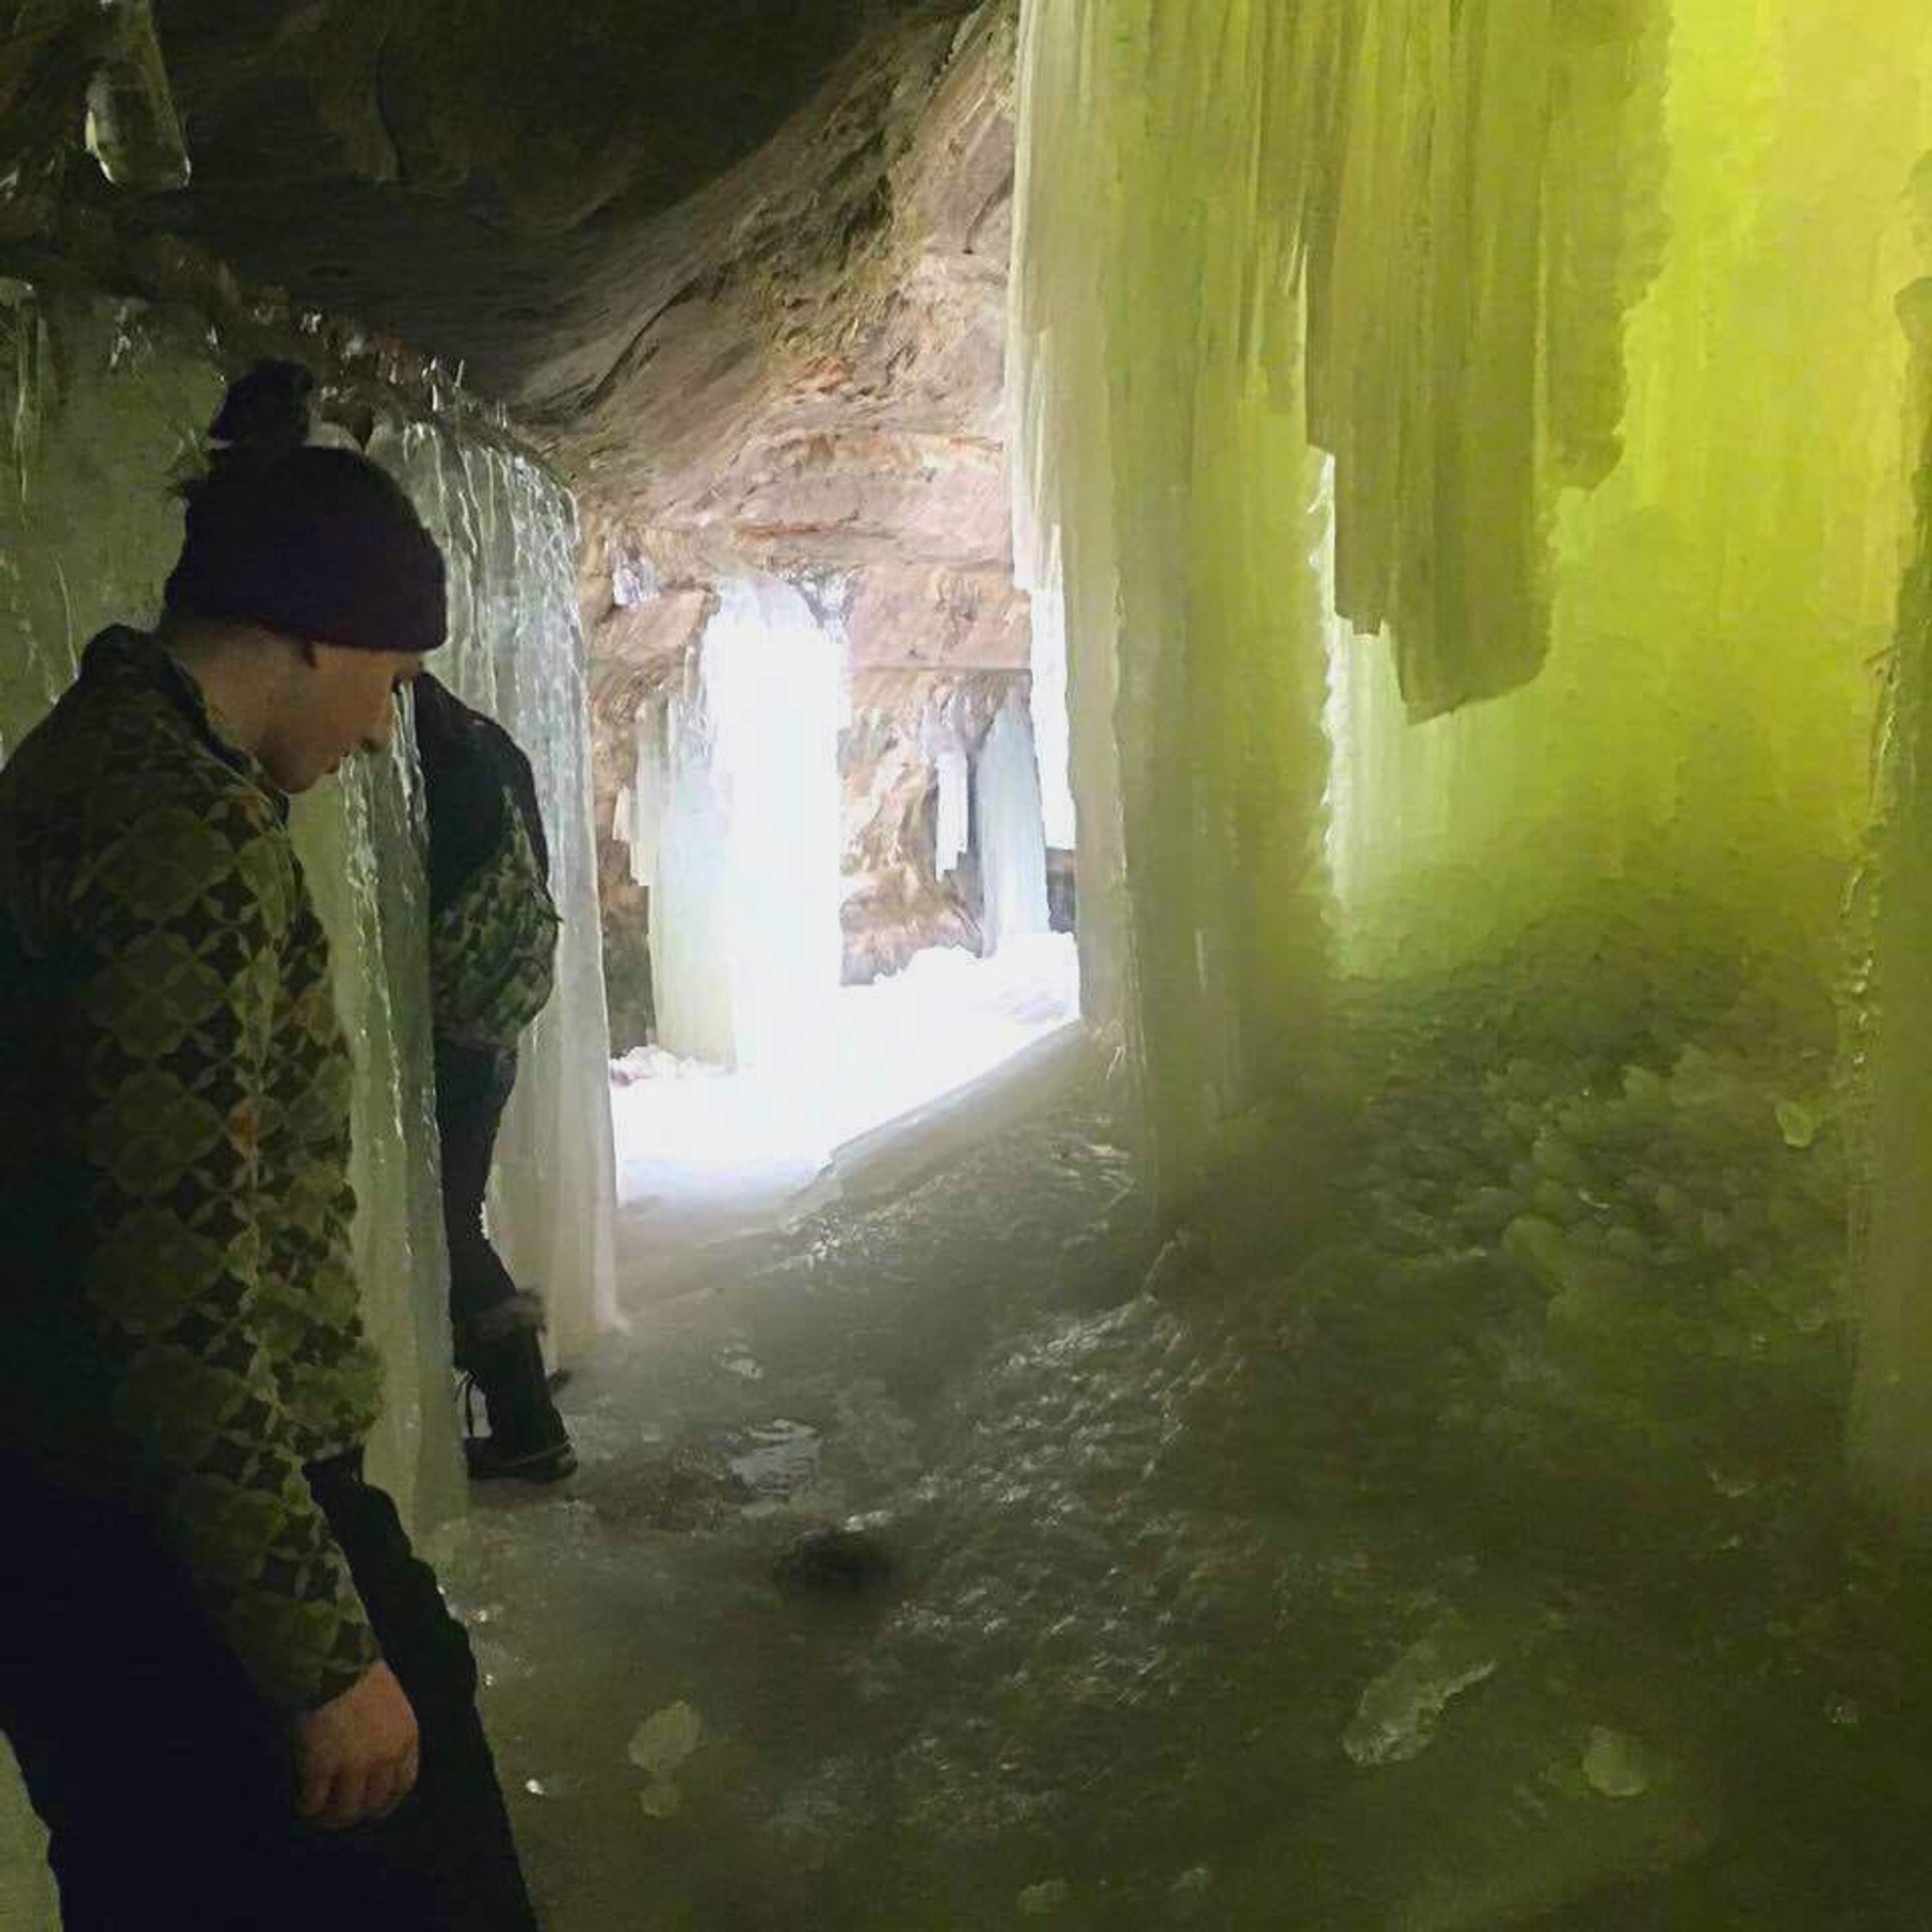 A view from the inside of the ice caves.